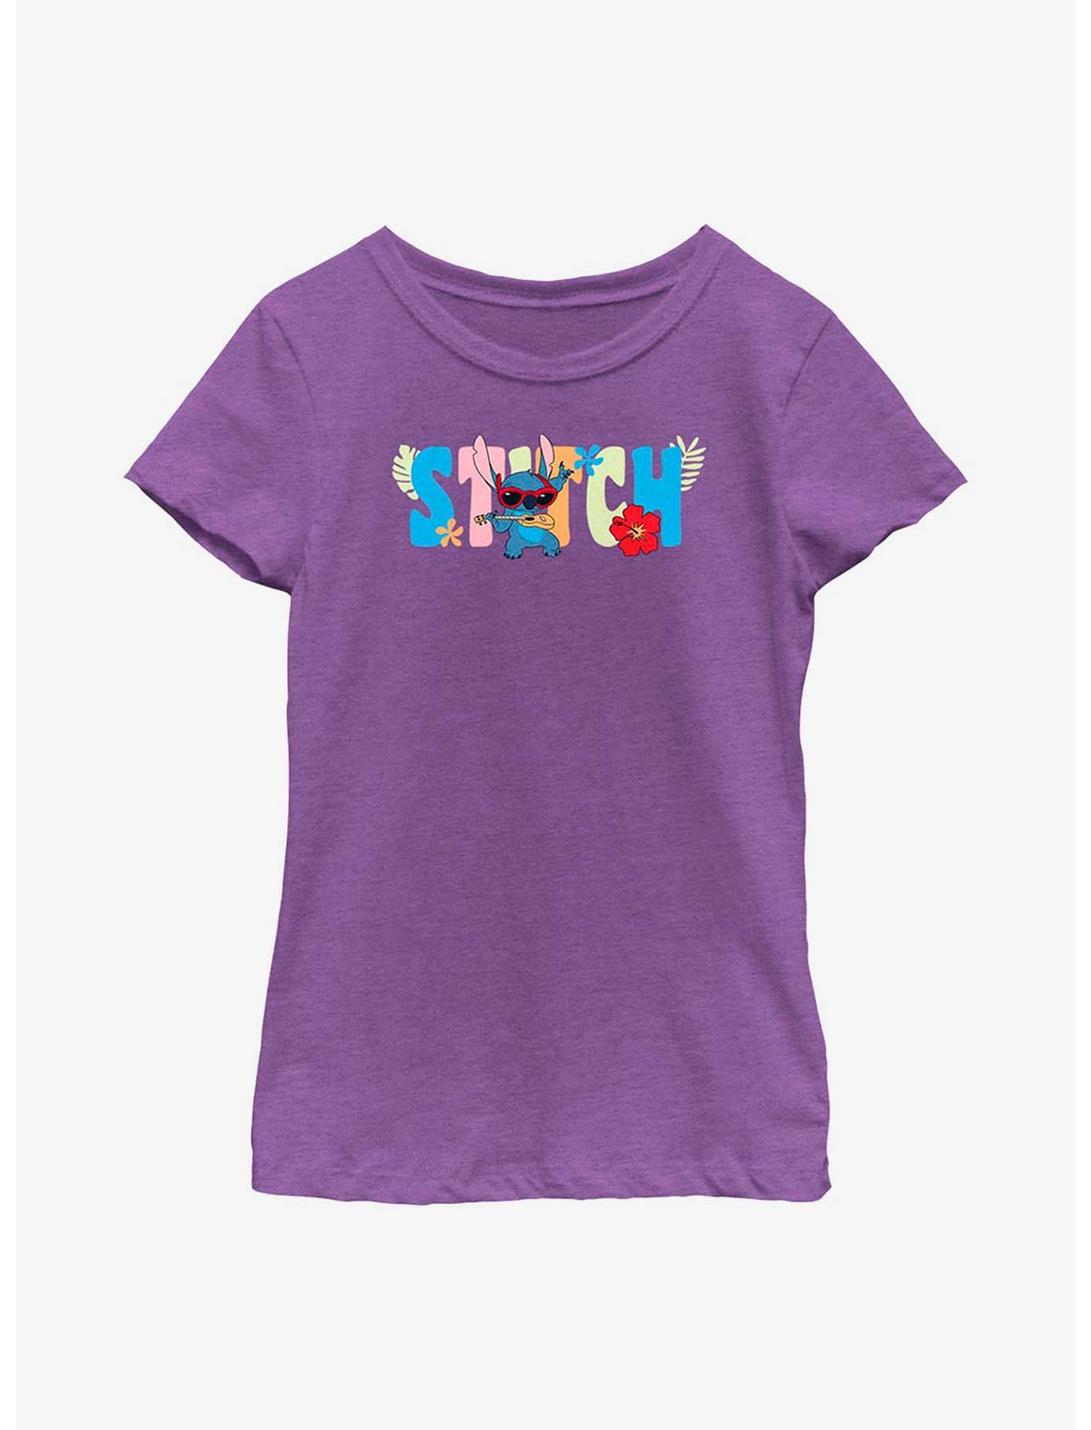 Disney Lilo And Stitch Tropic Shades Youth Girls T-Shirt, PURPLE BERRY, hi-res